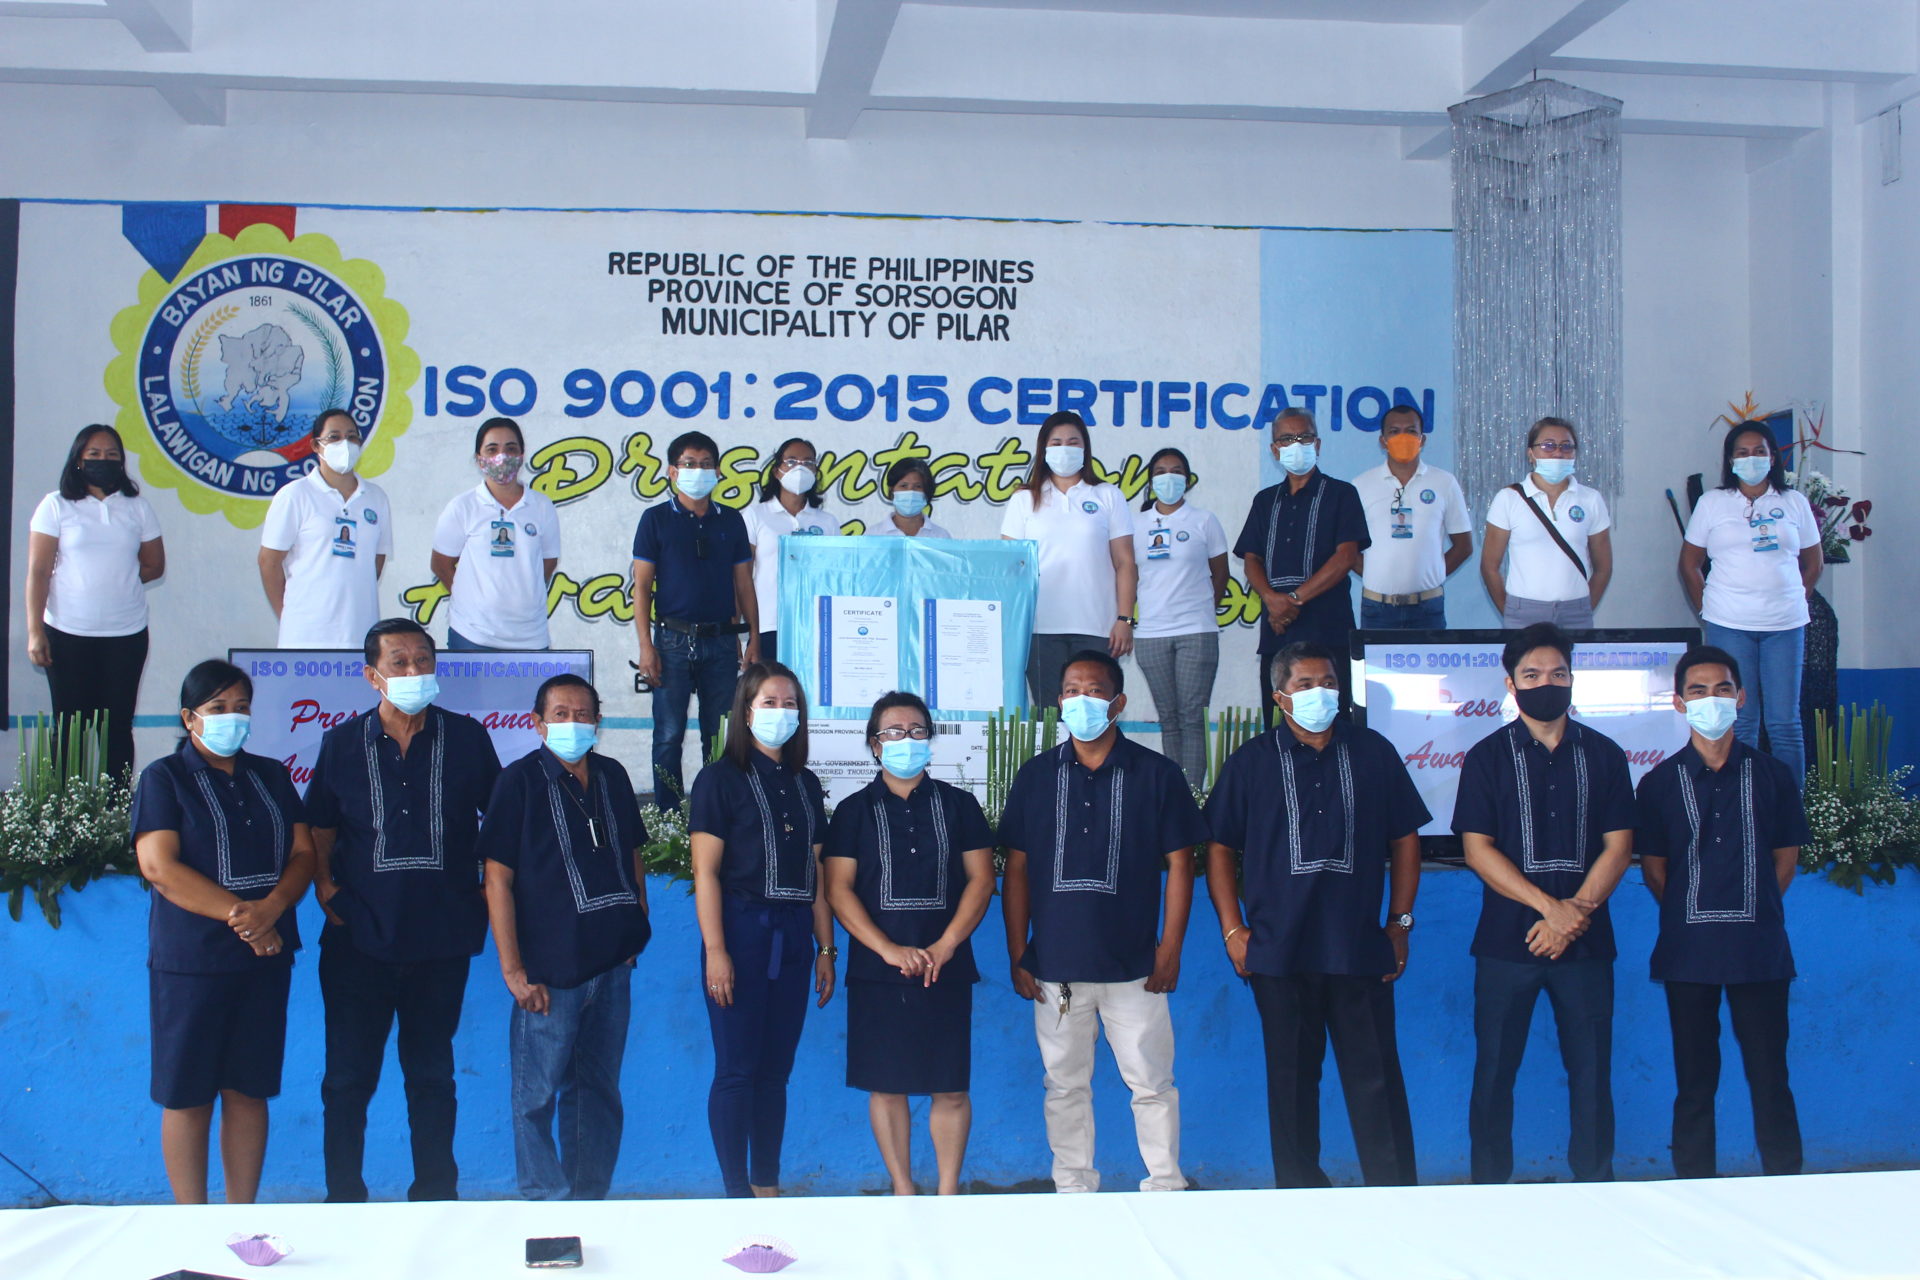 ISO 9001:2015 CERTIFICATION Presentation and Awarding Ceremony